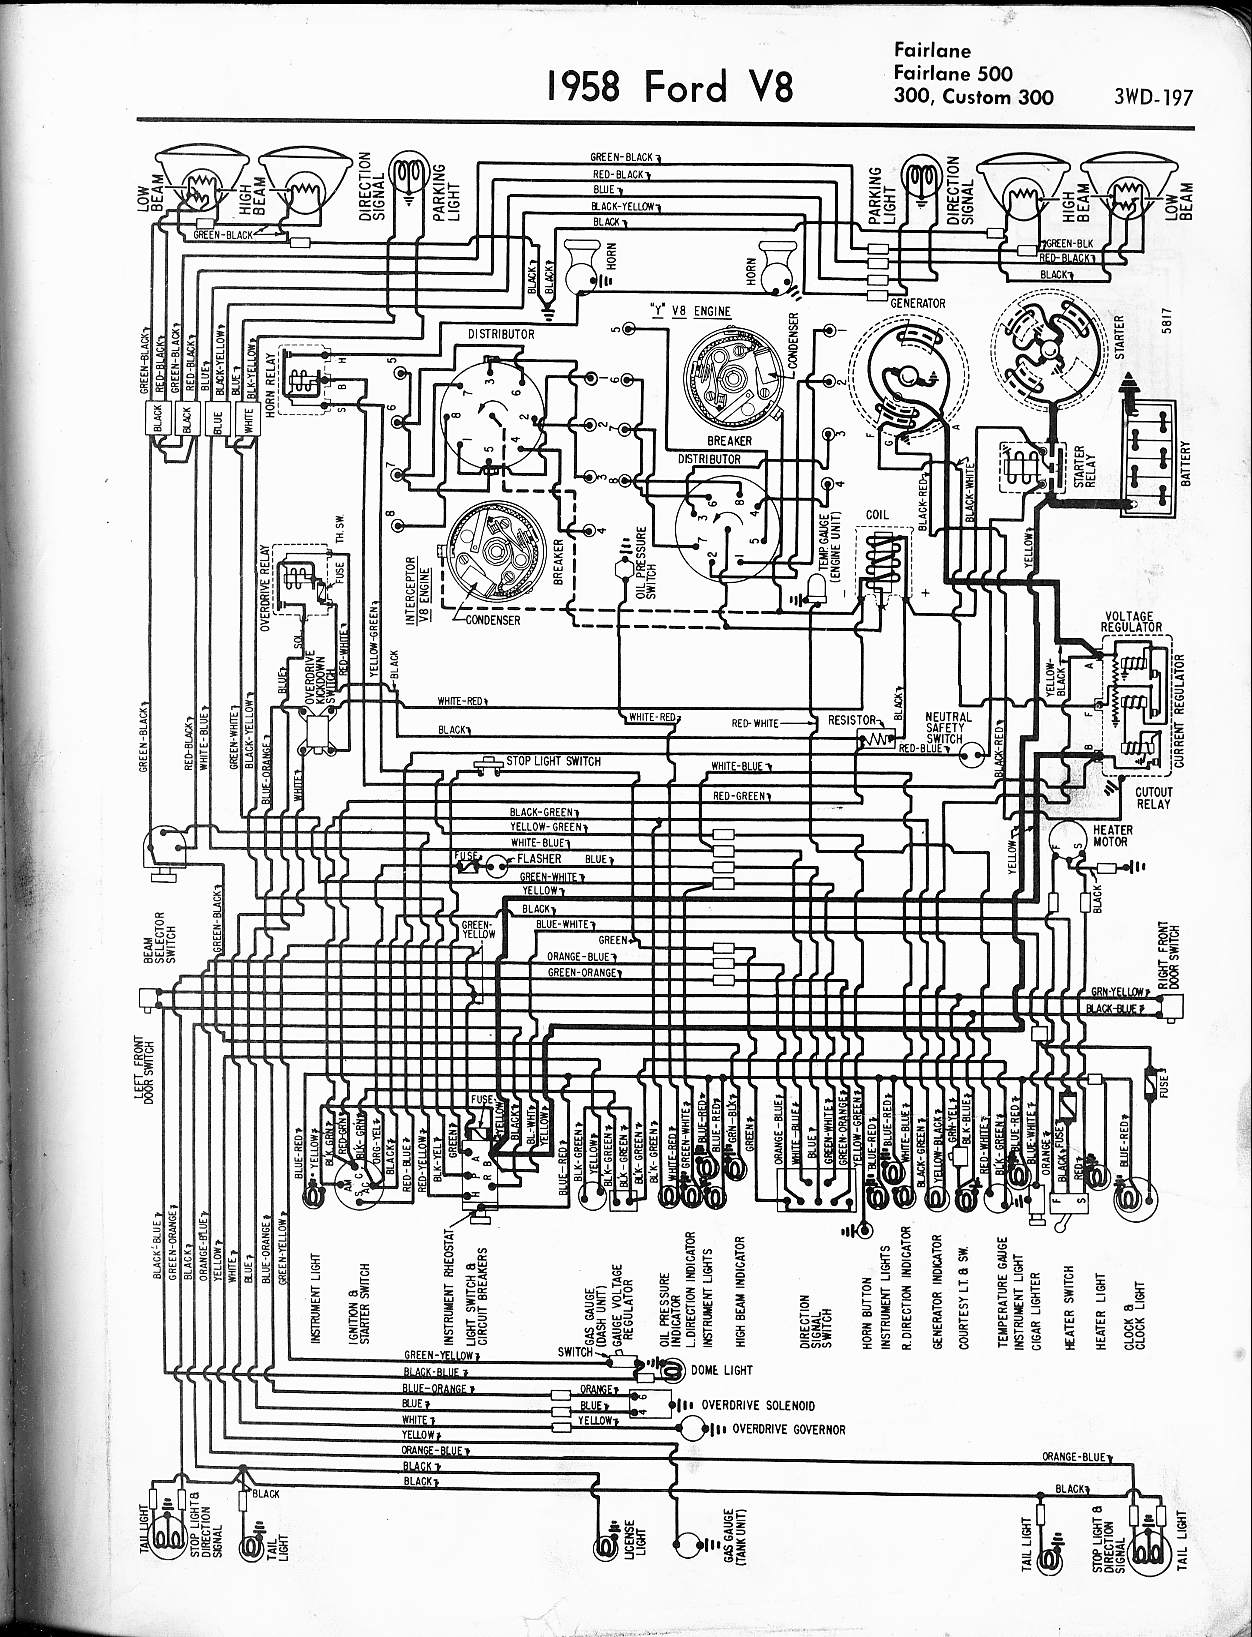 1968 Ford f100 wiring diagrams #5